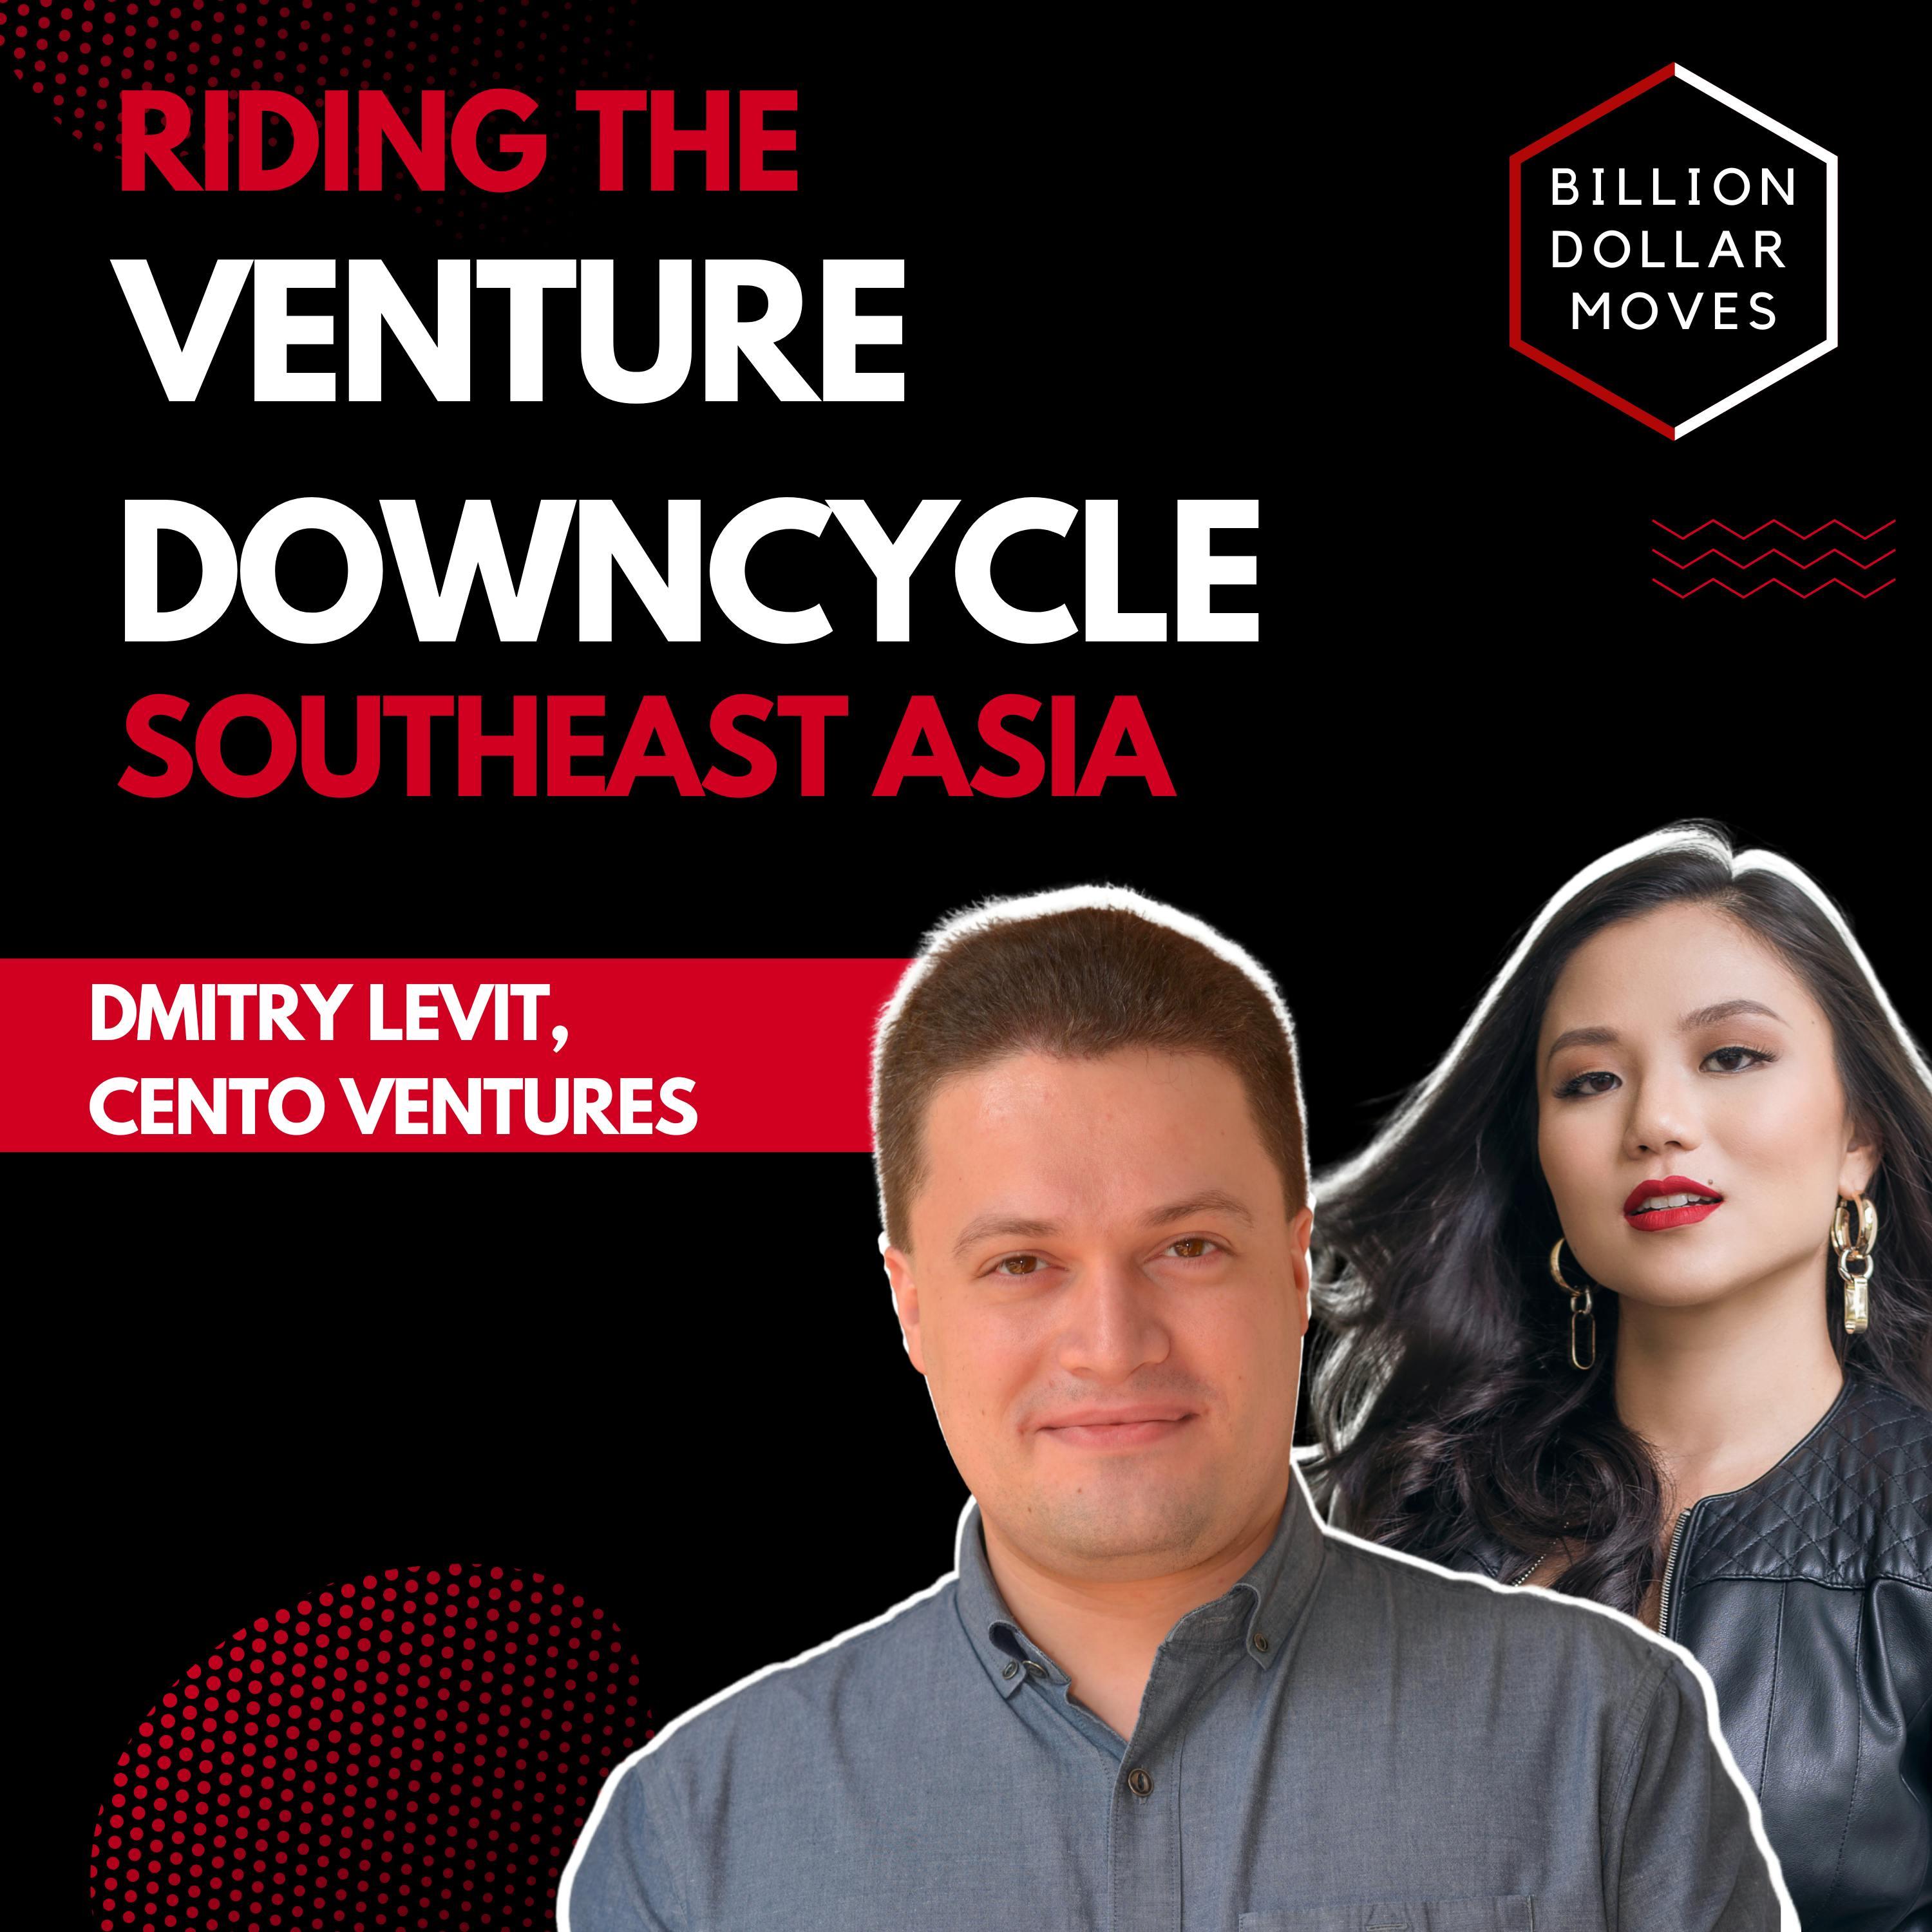 "Narratives Driving Substance" —Riding the Venture Downcycle: Investing in Southeast Asia with Dmitry Levit, Cento Ventures (Part 1)